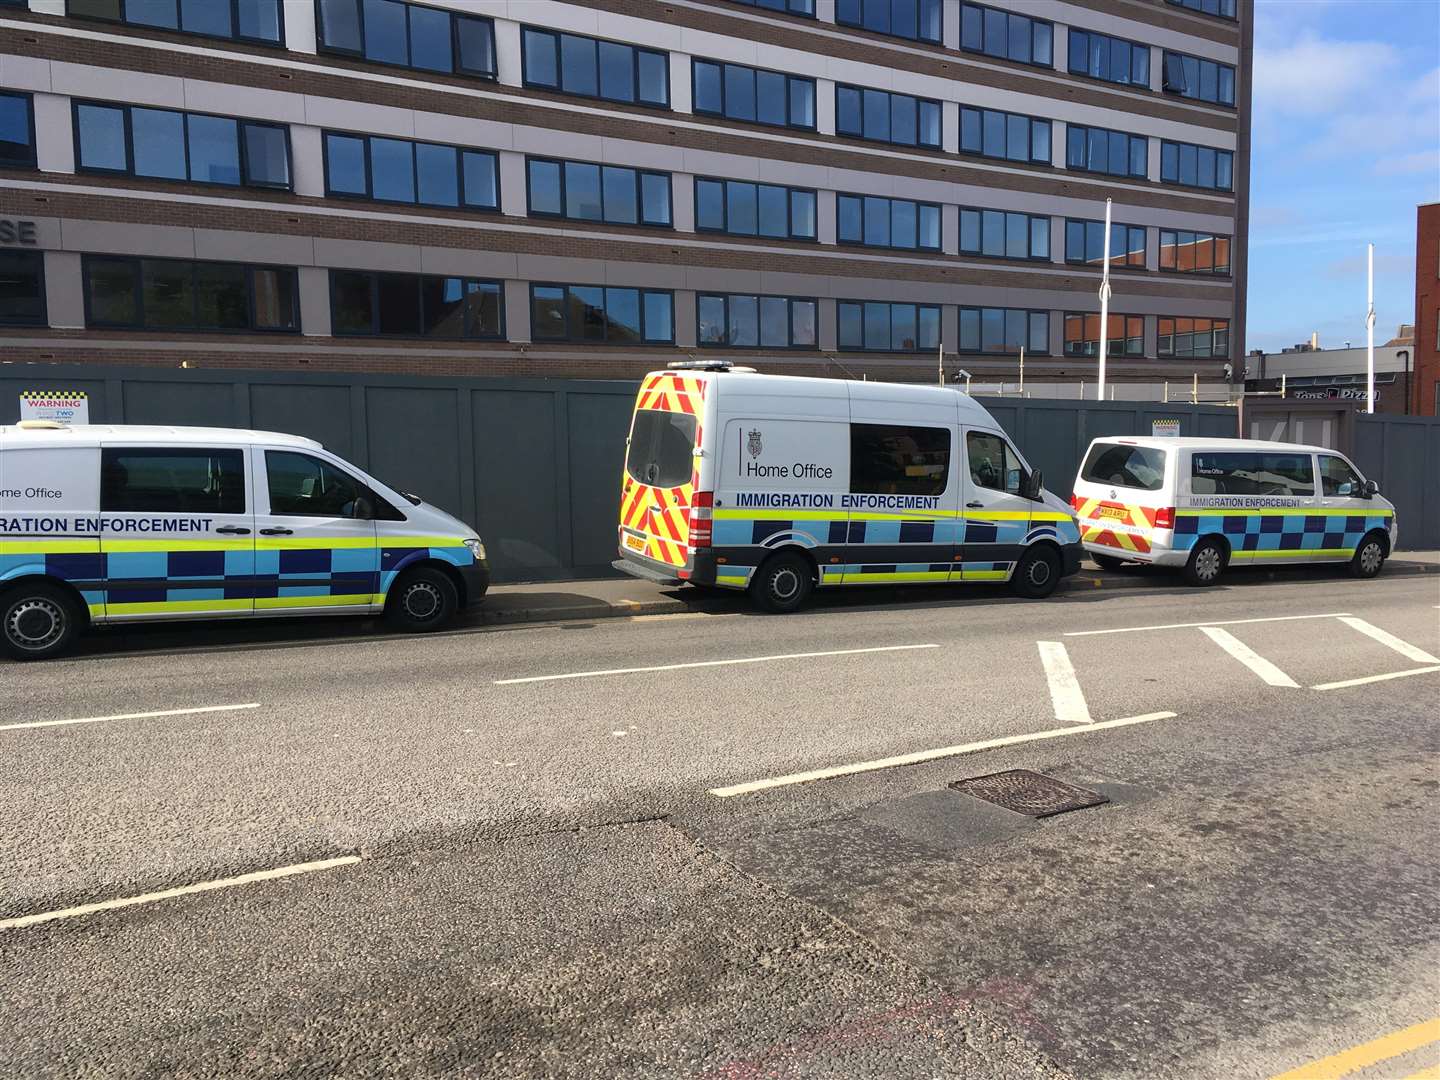 Immigration enforcement vans spotted in Romney Place, Maidstone (2749940)